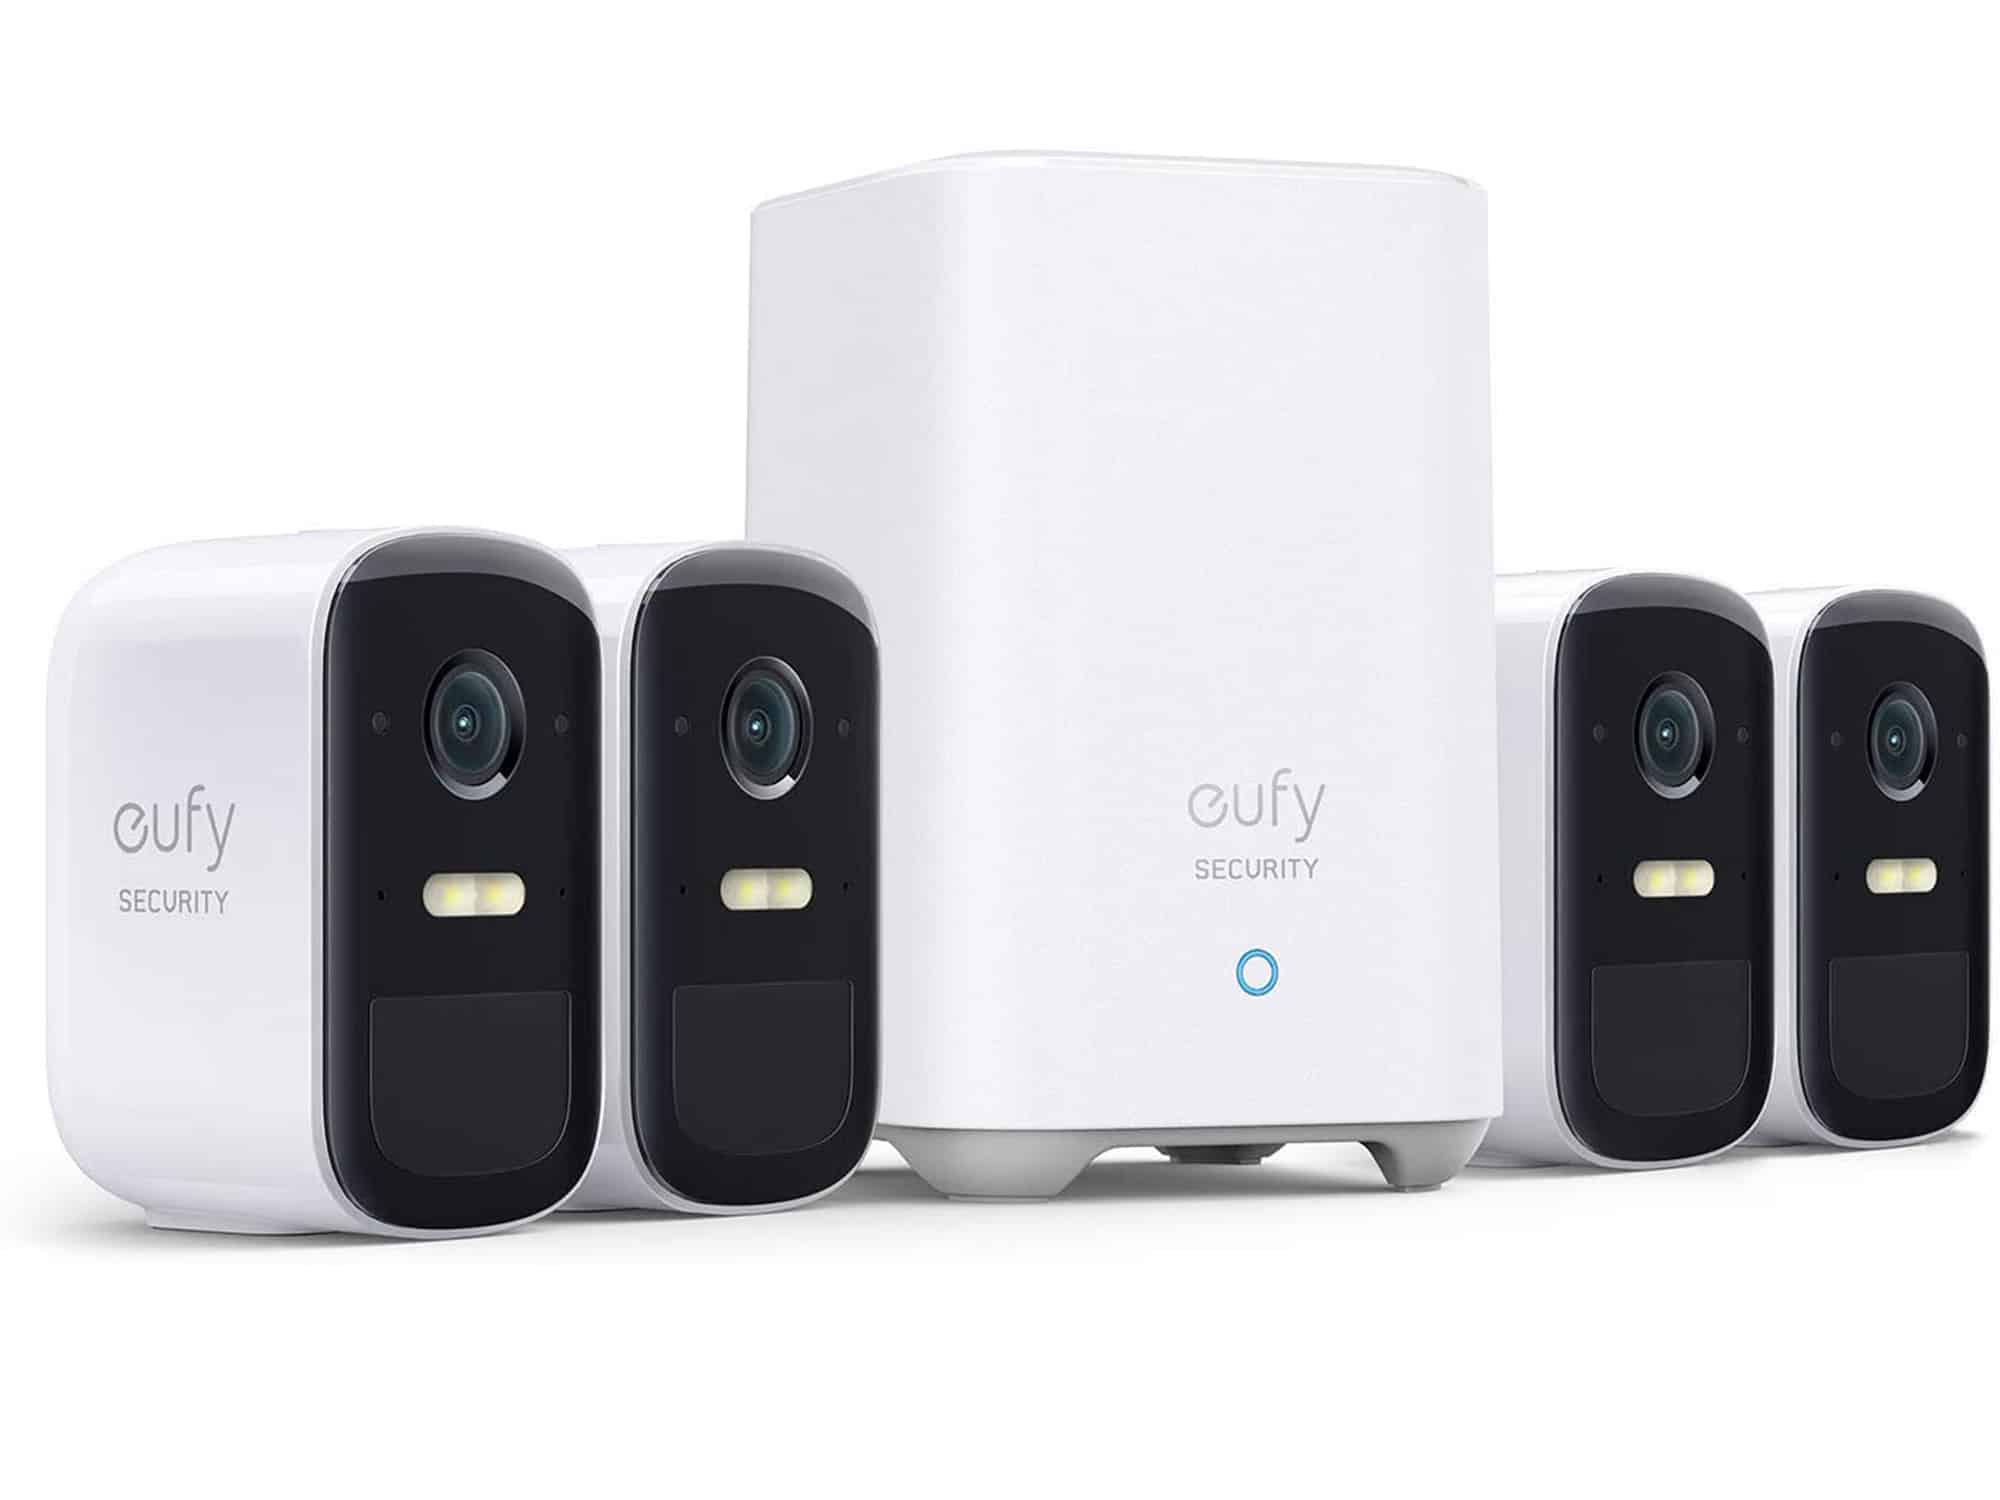 Eufy Security, eufyCam 2C Pro 4-Cam Kit, Wireless Home Security System with 2K Resolution, HomeKit Compatibility, 180-Day Battery Life, IP67, Night Vision, and No Monthly Fee.